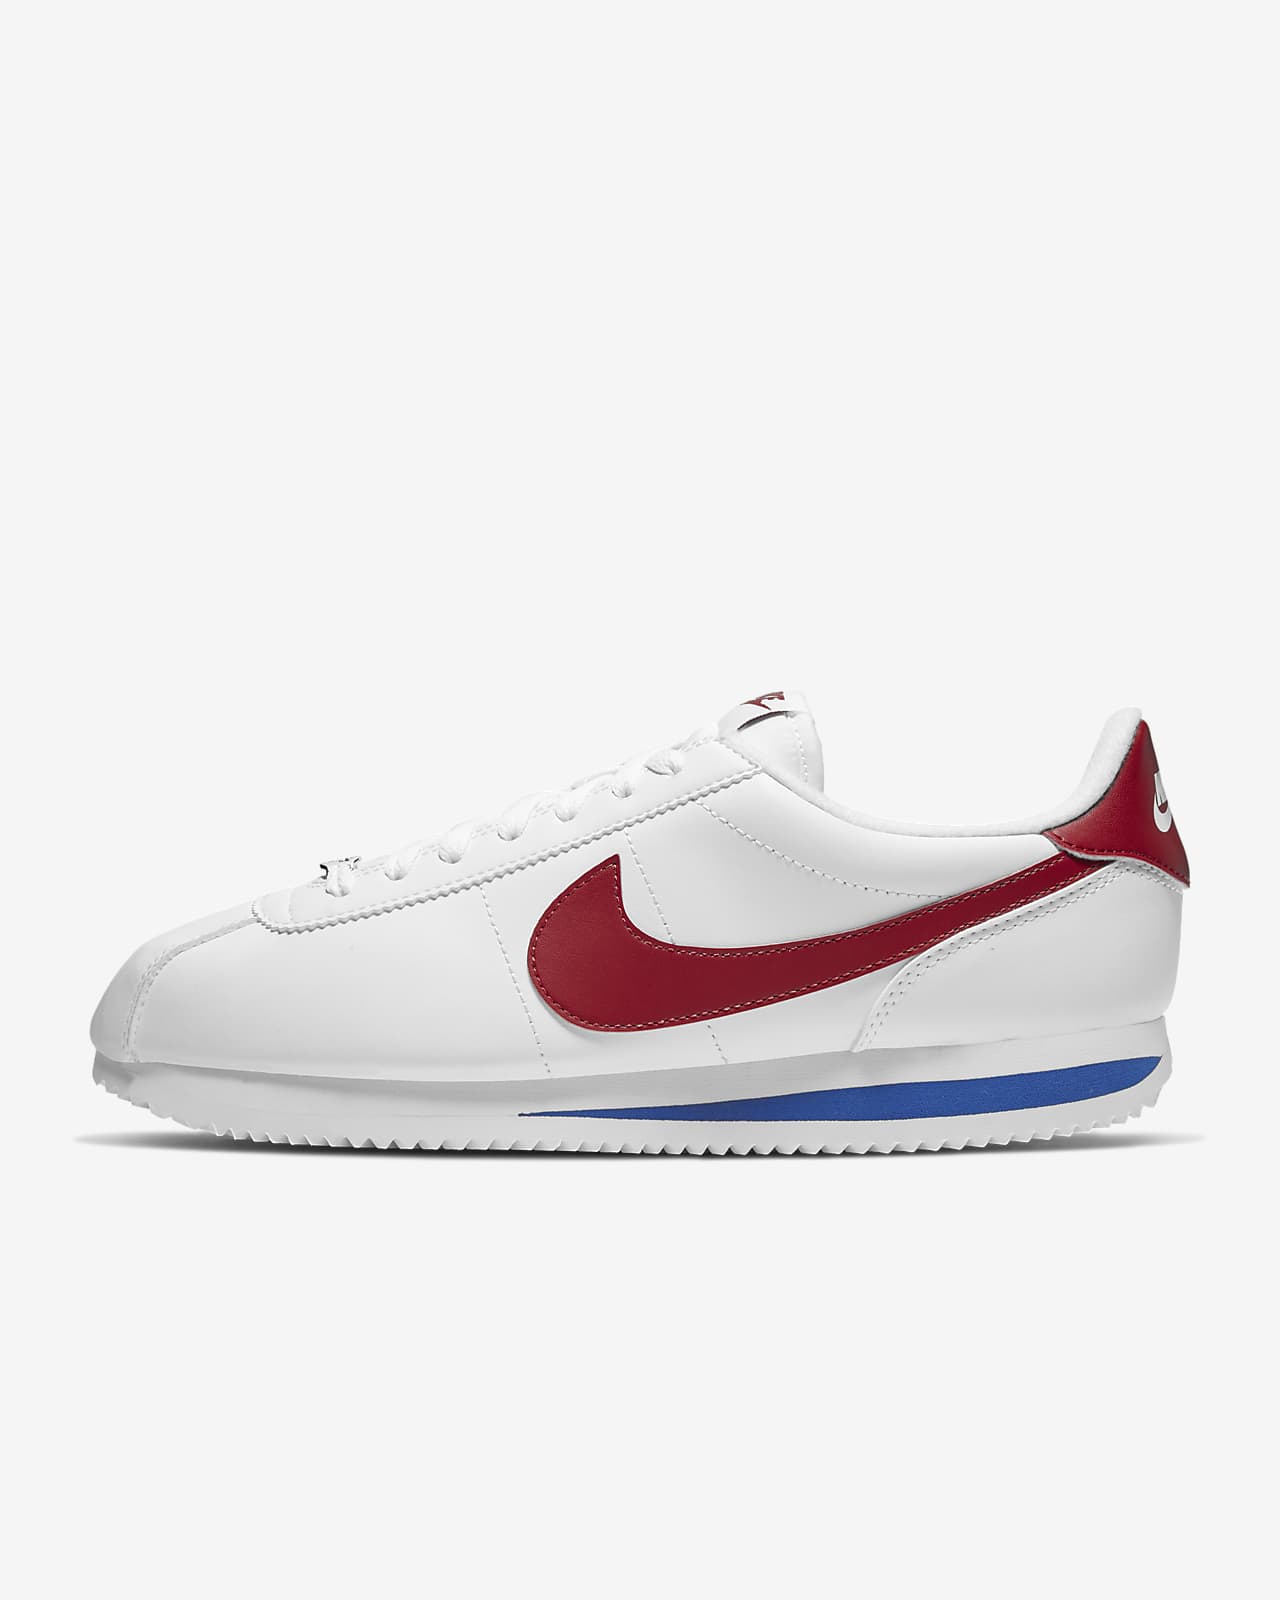 history of the nike cortez